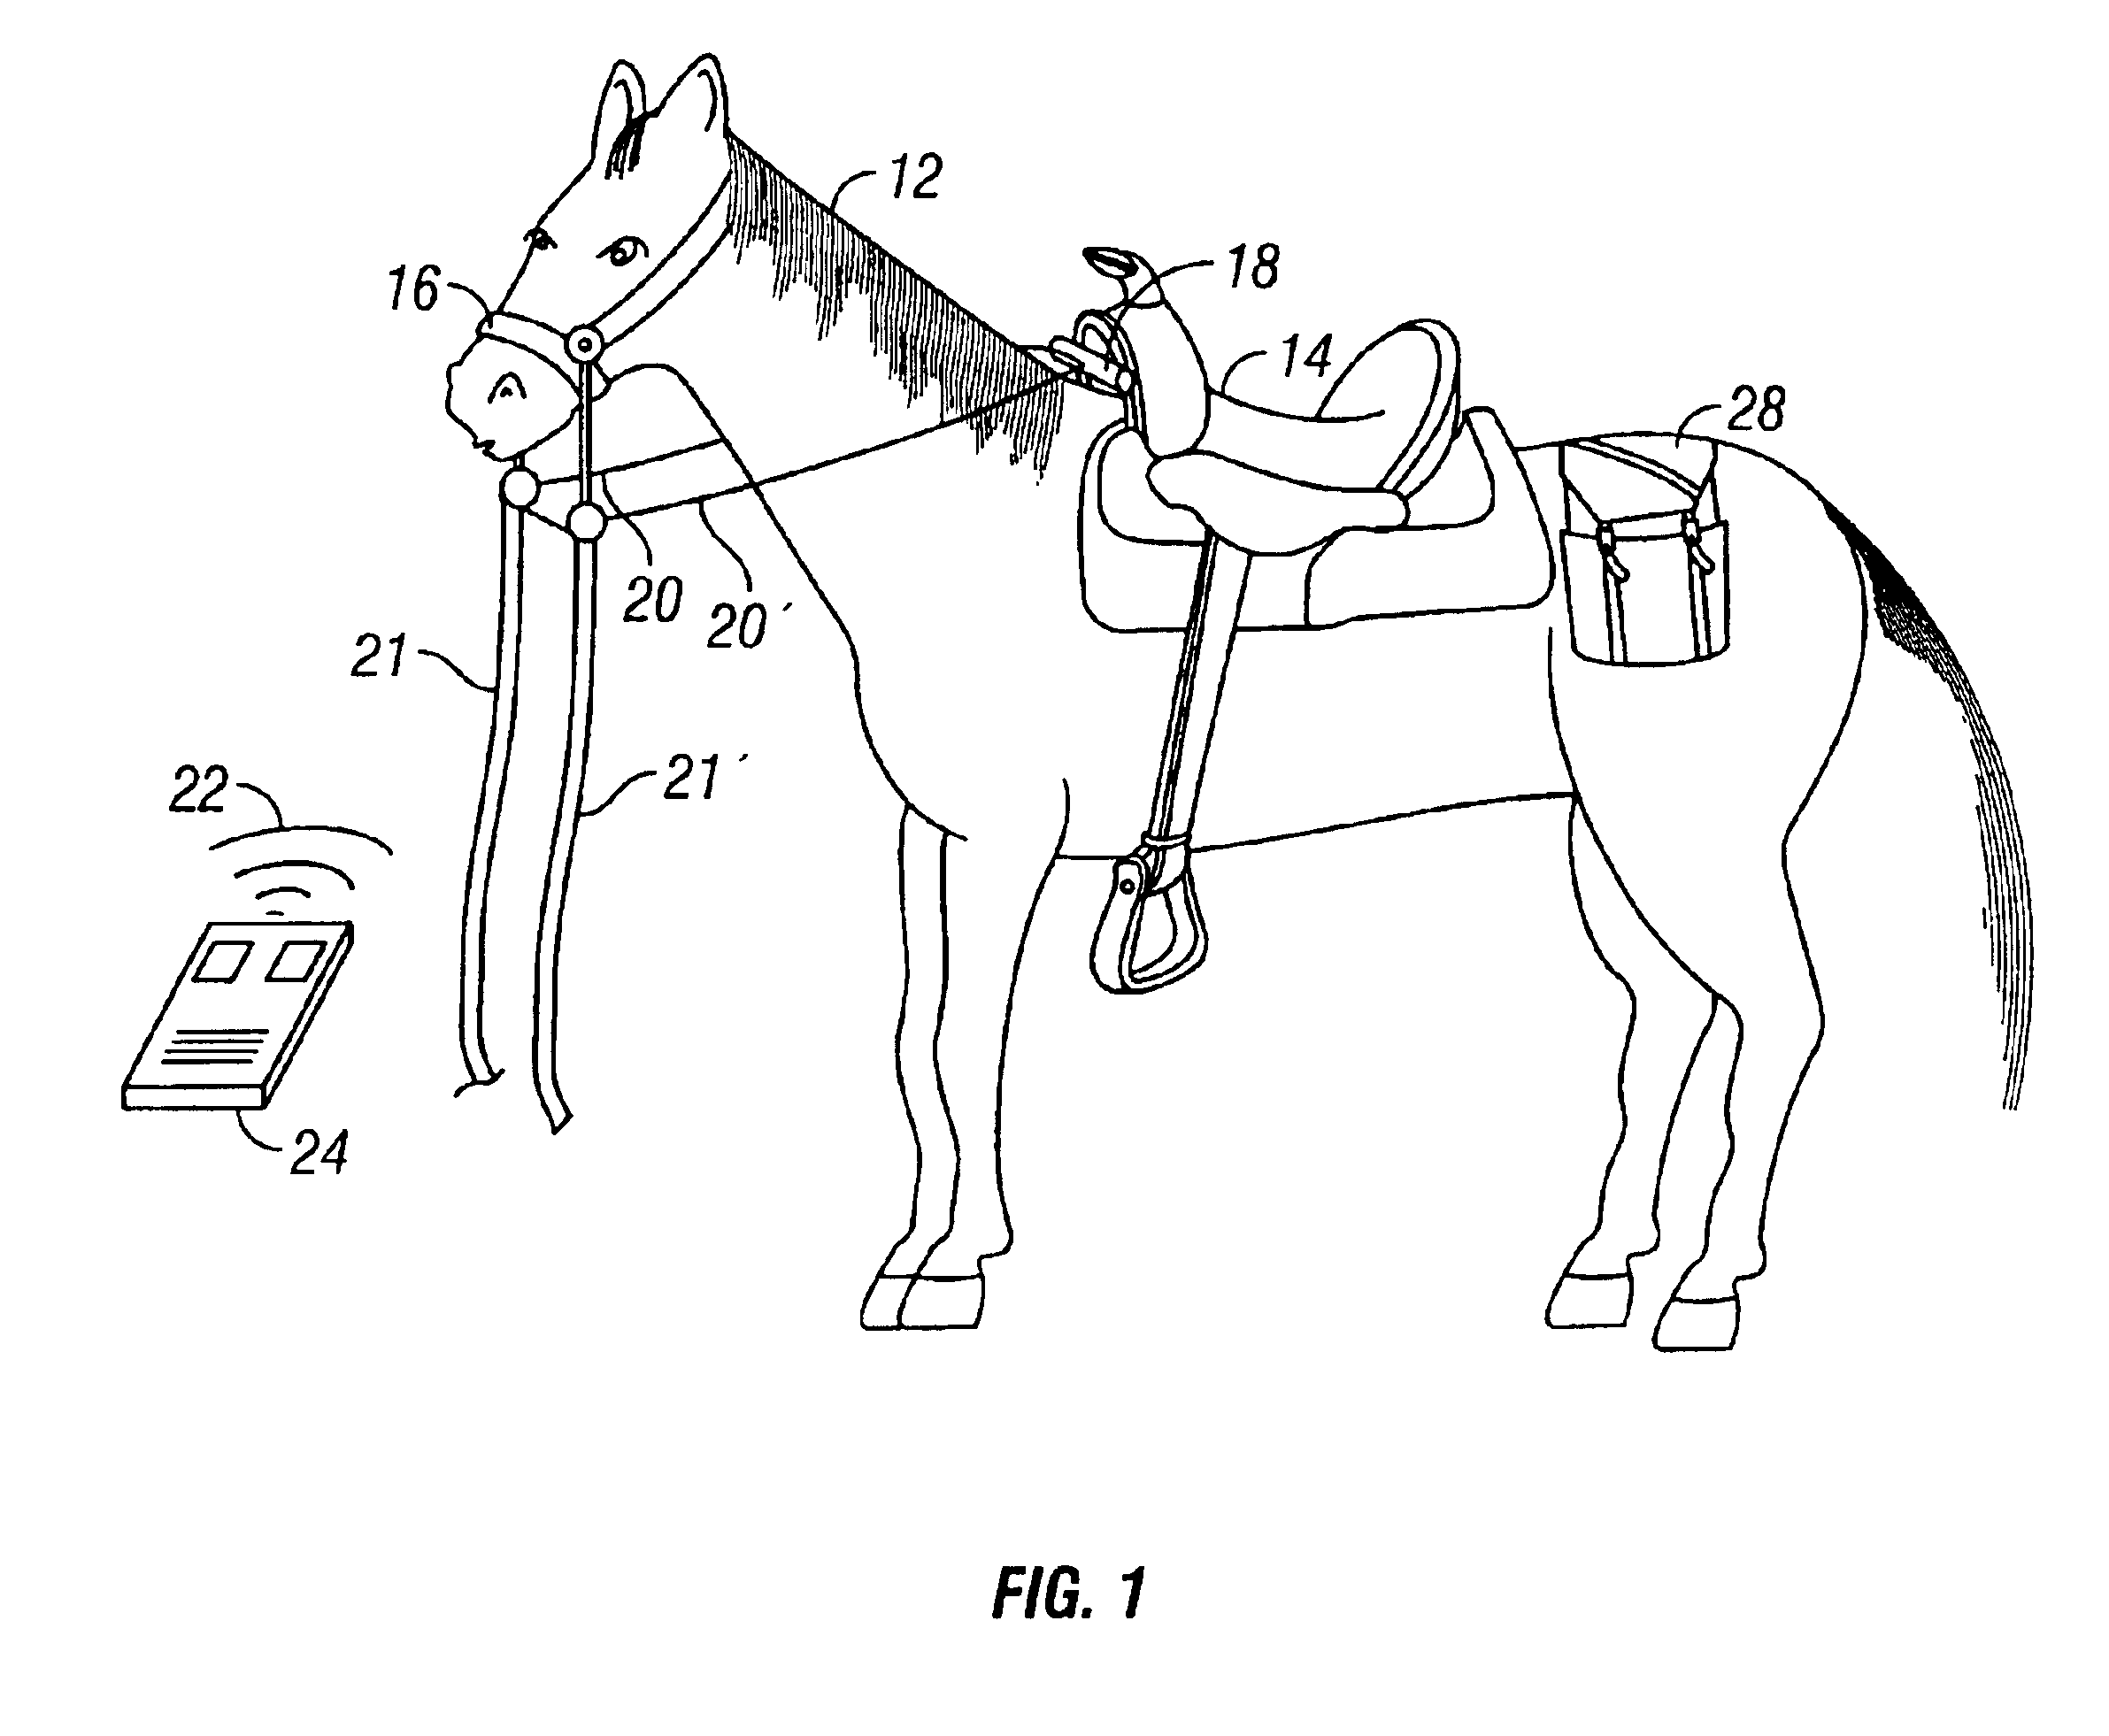 Apparatus and method for controlling an animal